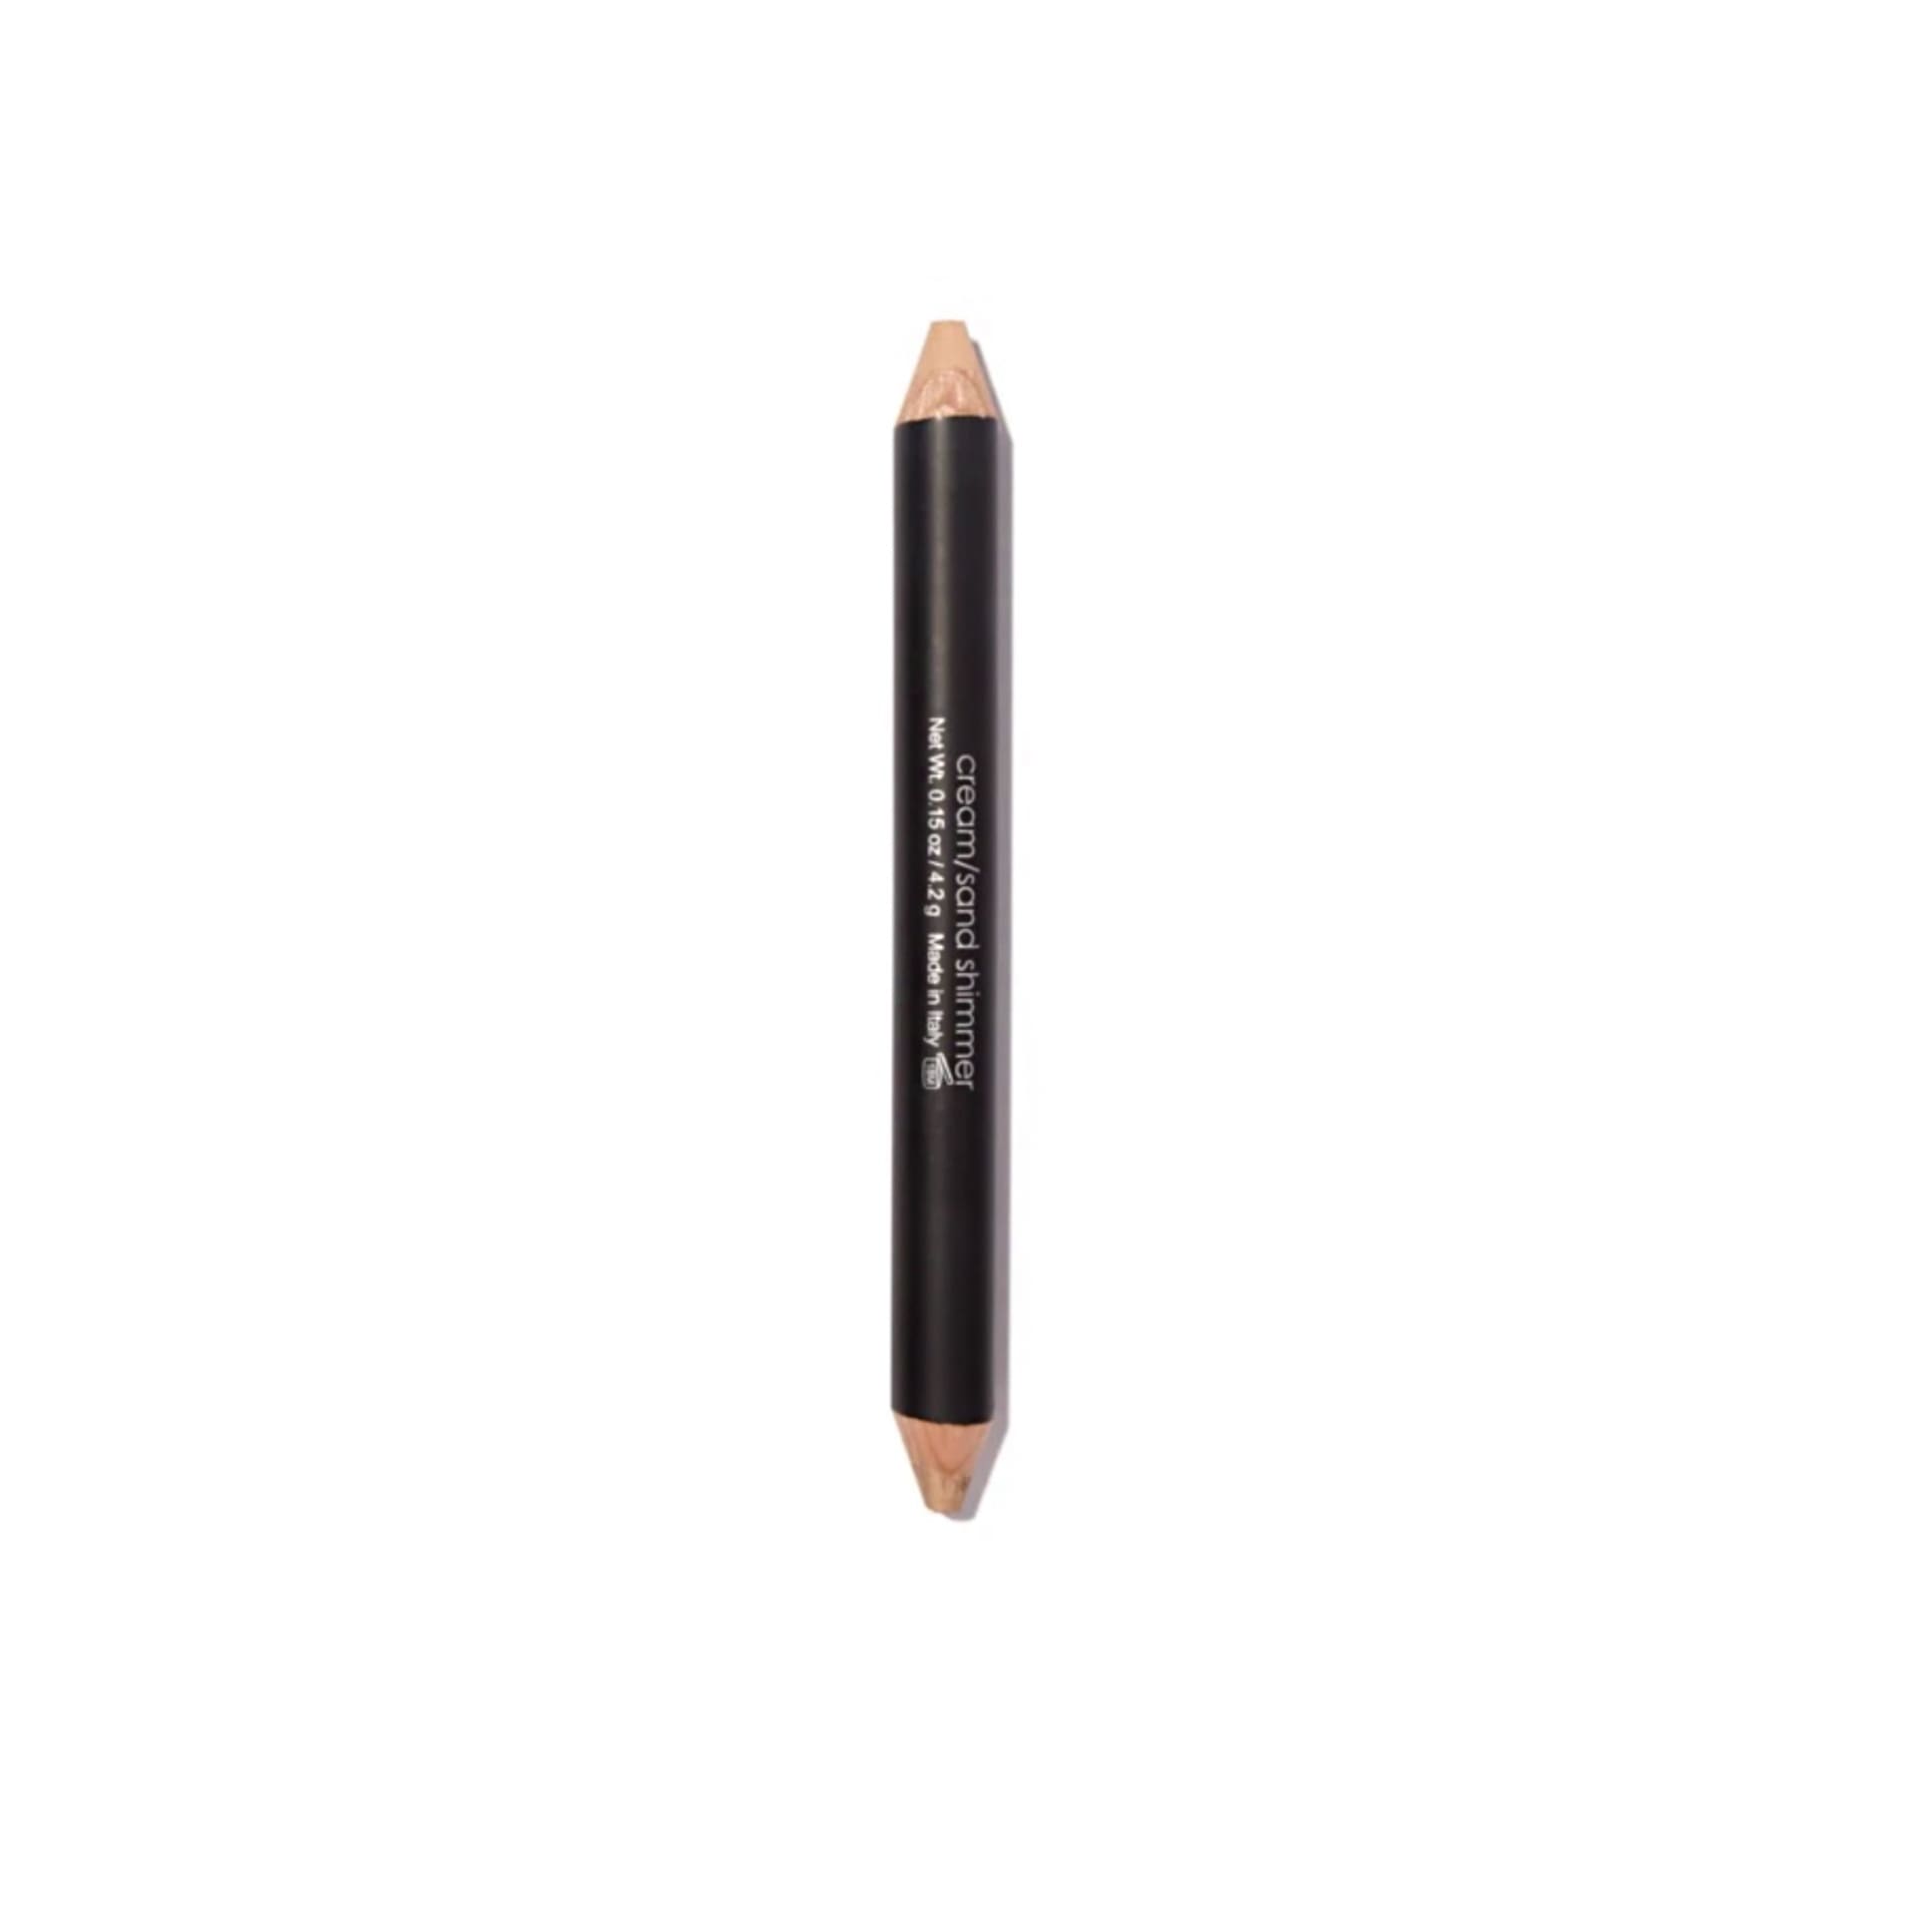 Brow Dual Highlighter Stick - The Perfect Brows